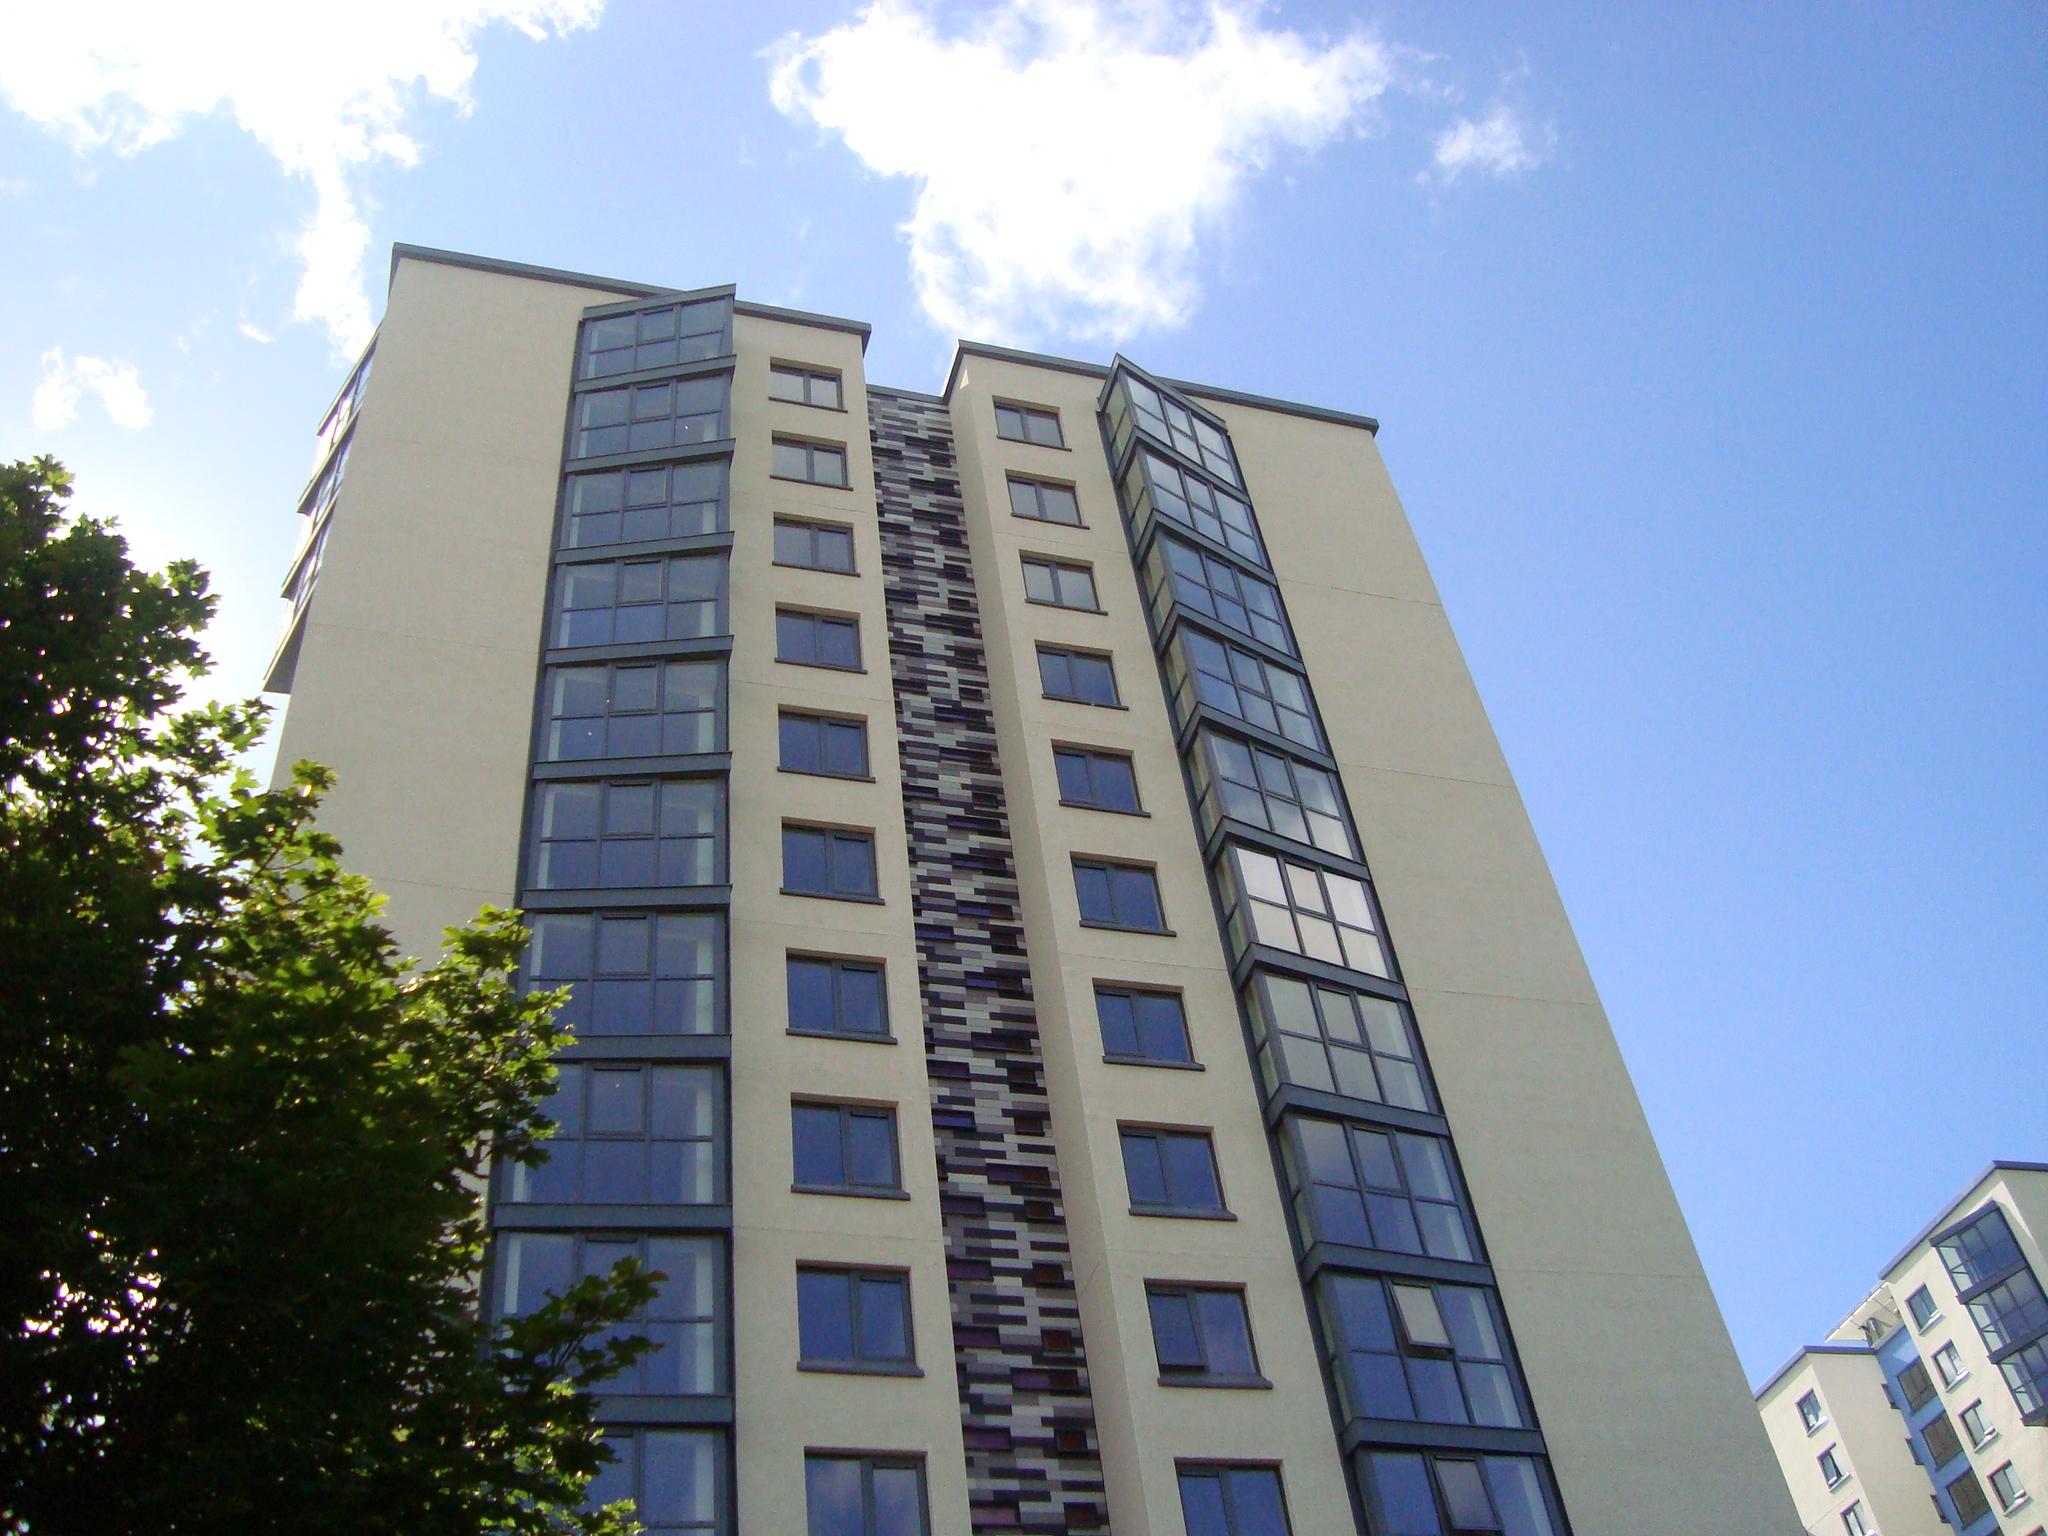 A high-rise block of flats managed by Your Homes Newcastle